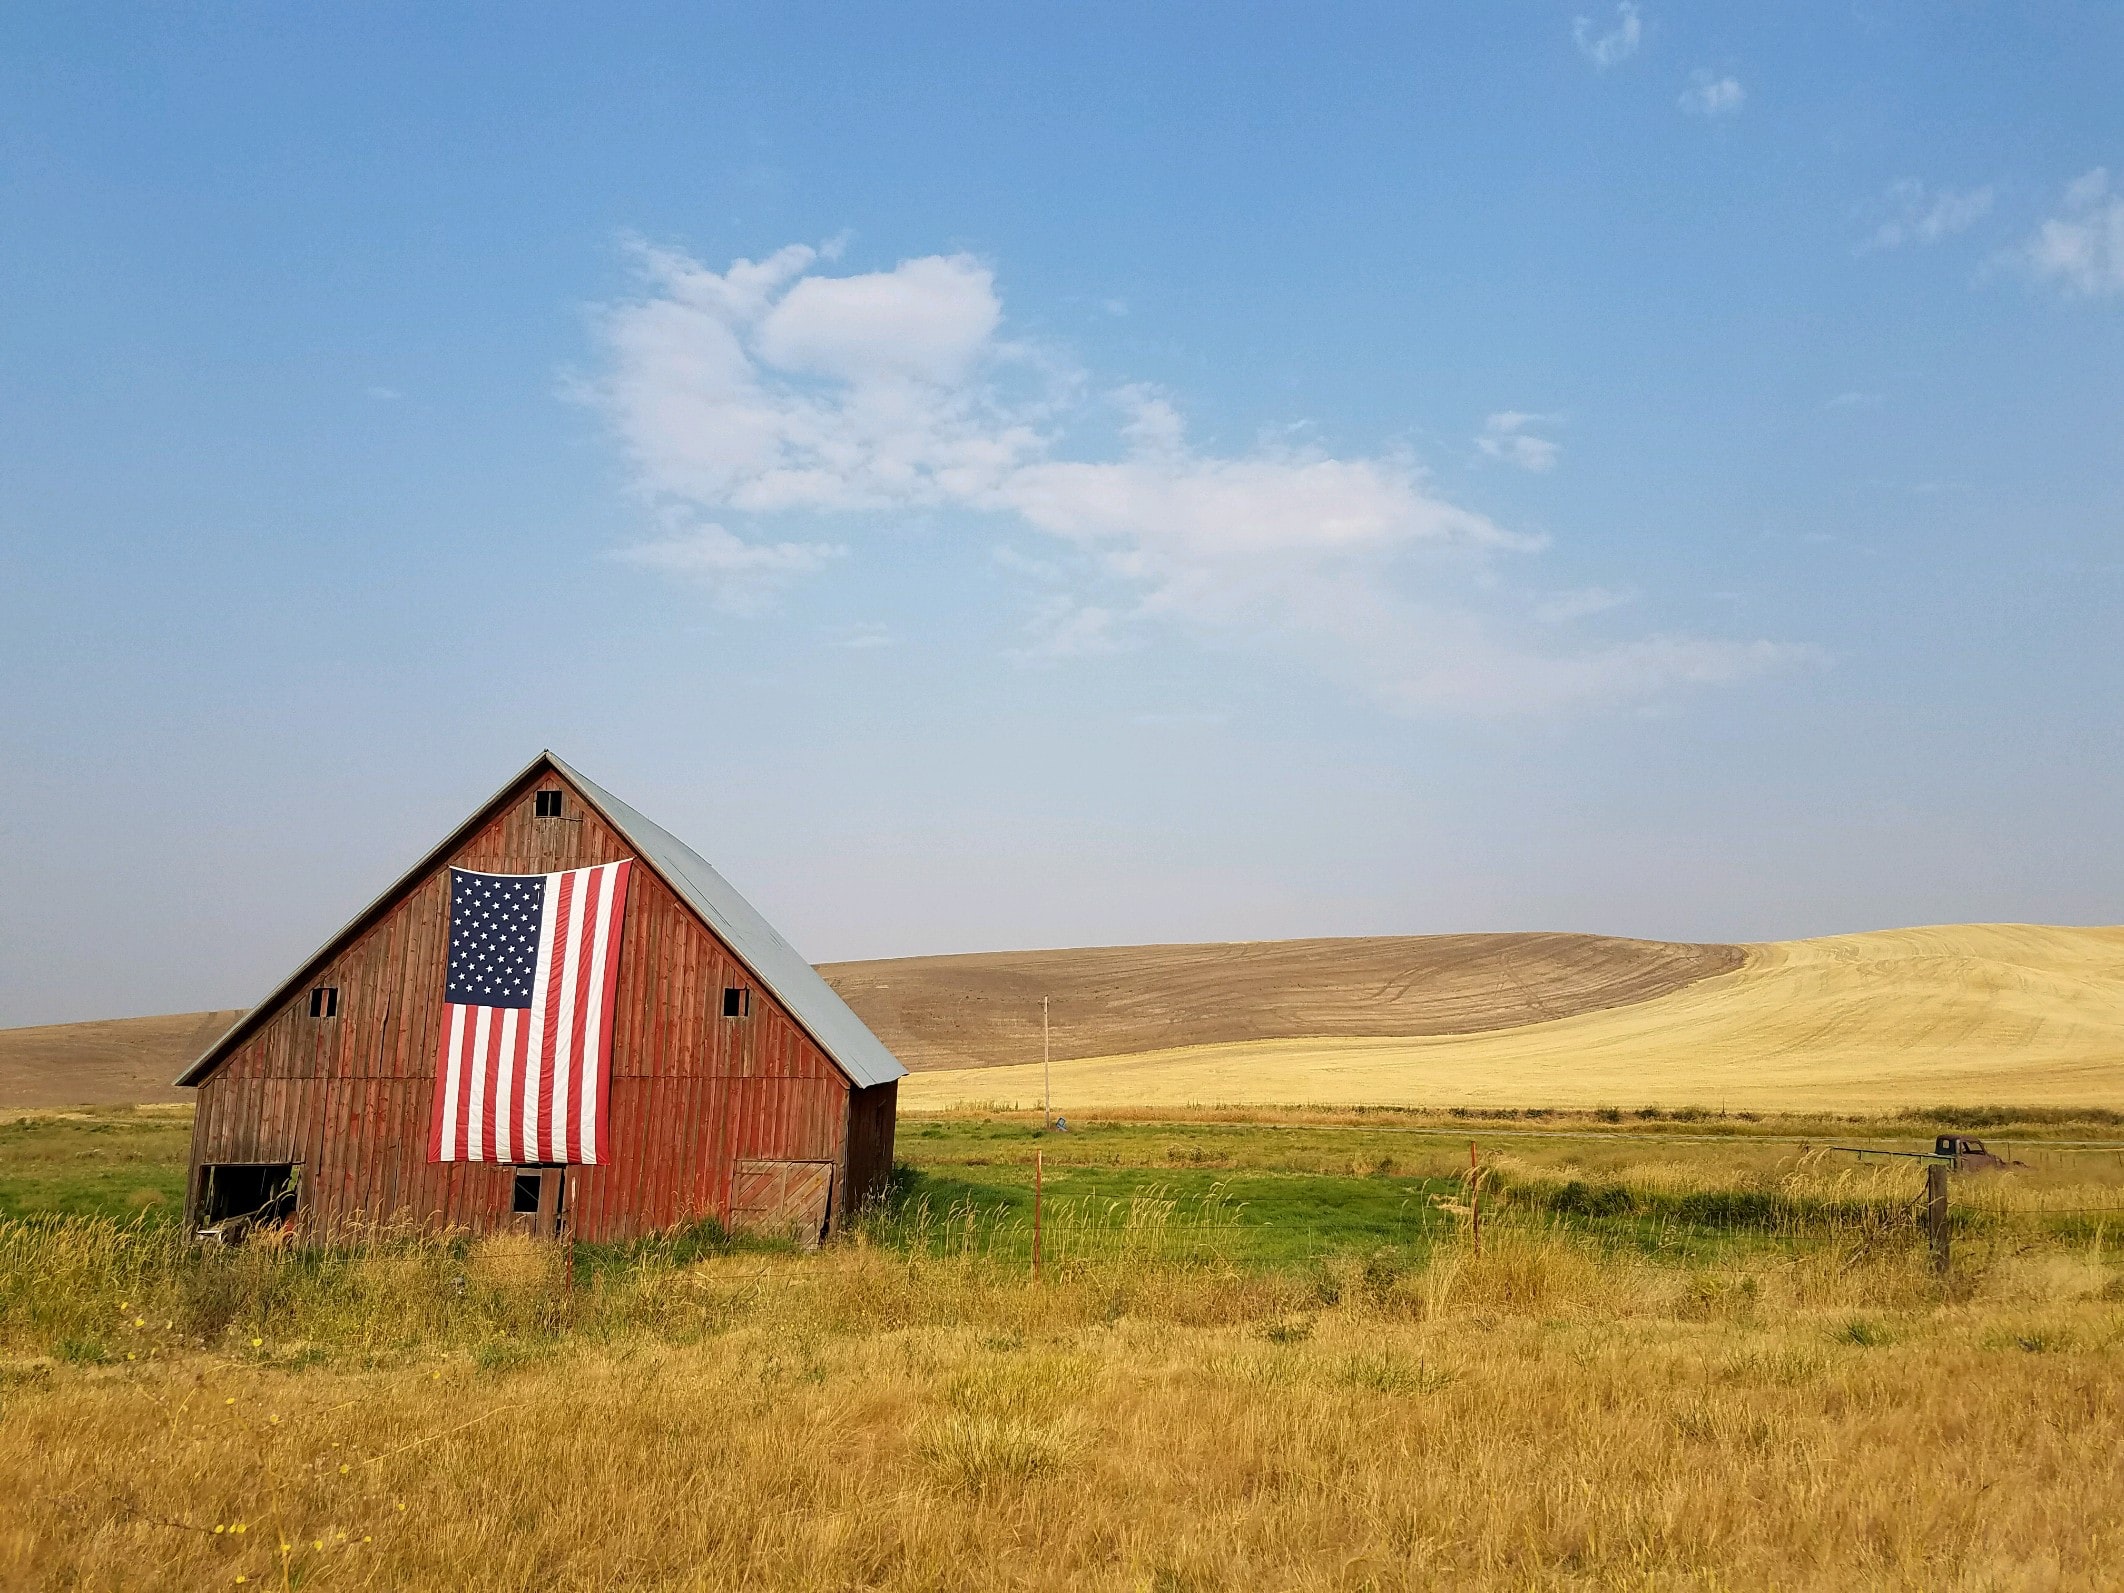 house in field with American flag